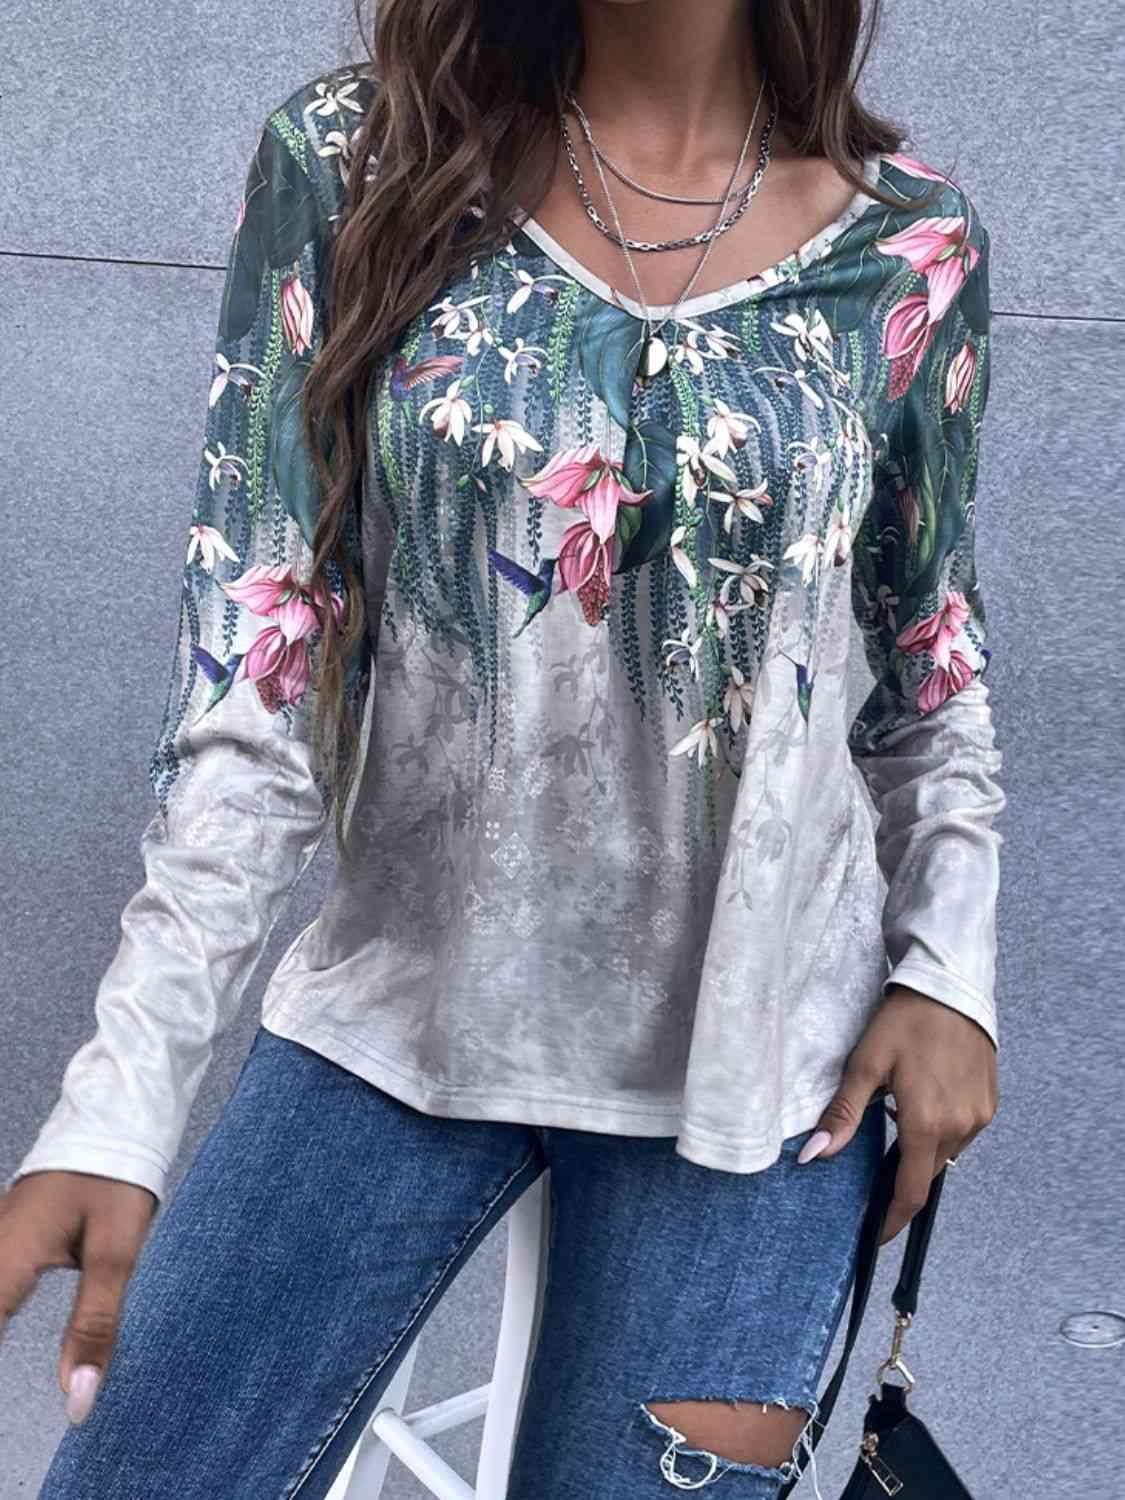 a woman wearing ripped jeans and a floral top